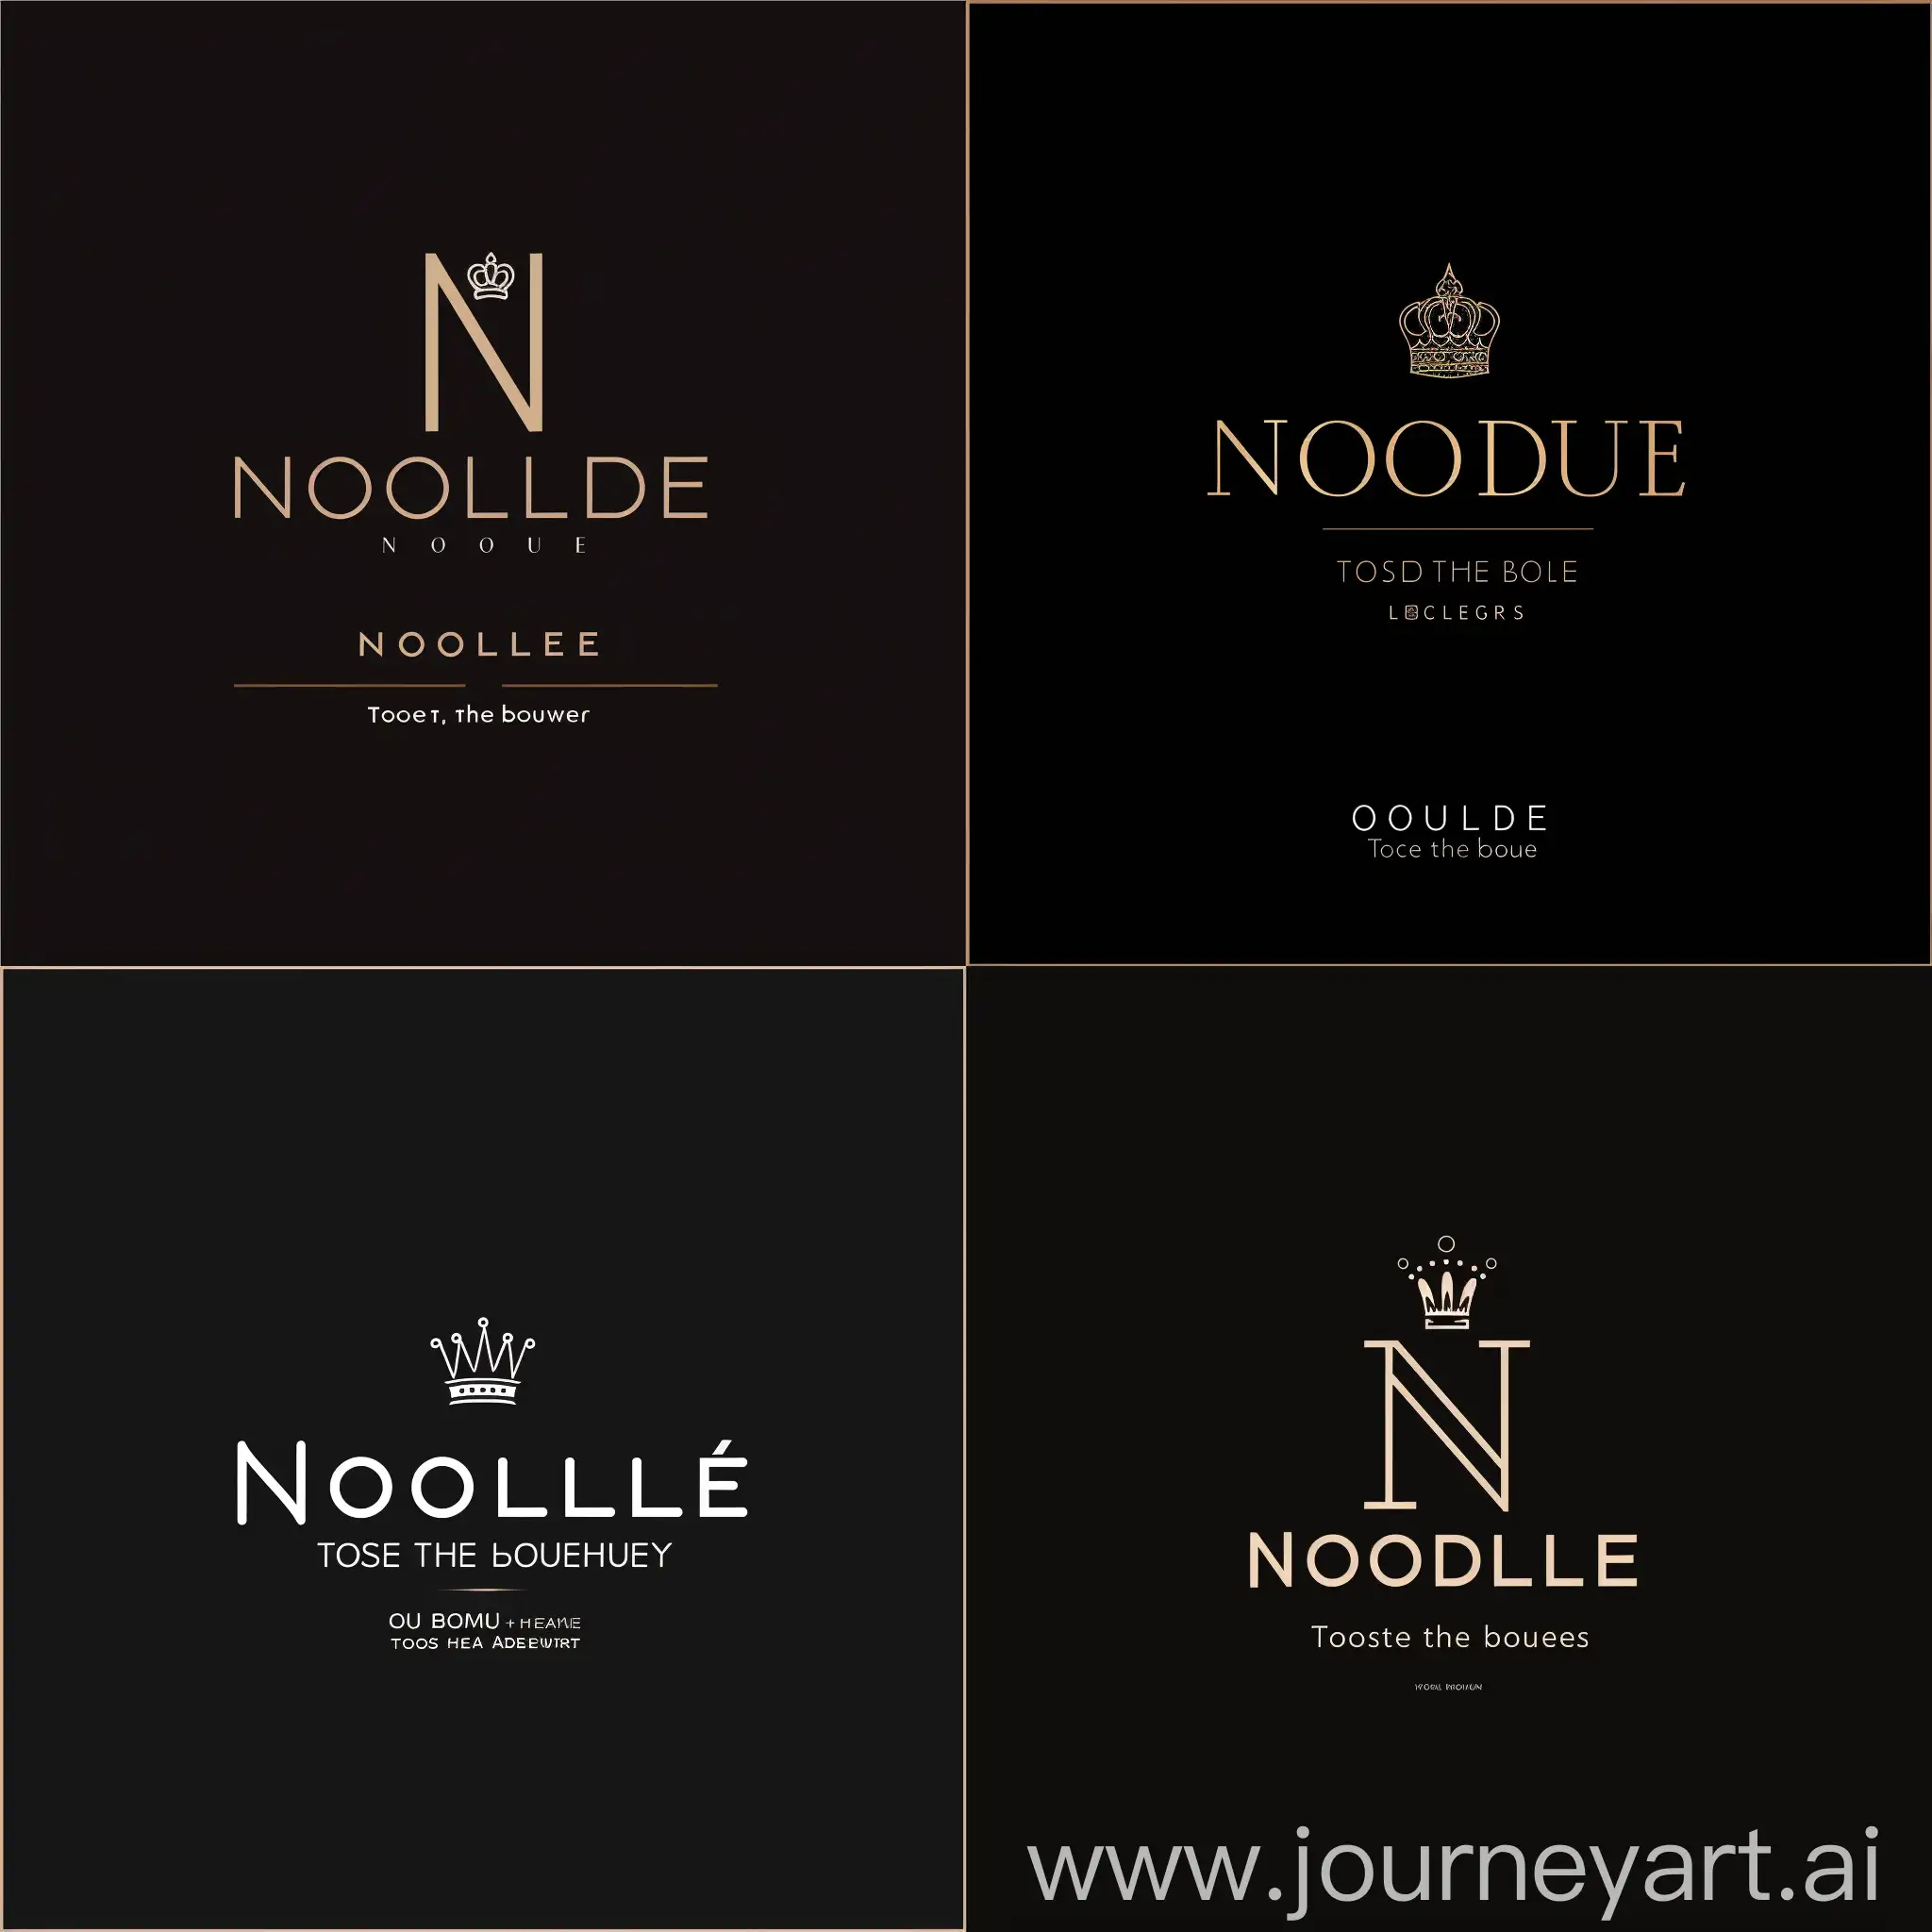 Minimalist-Logo-Design-for-Noble-Brand-with-Crown-Symbol-and-Slogan